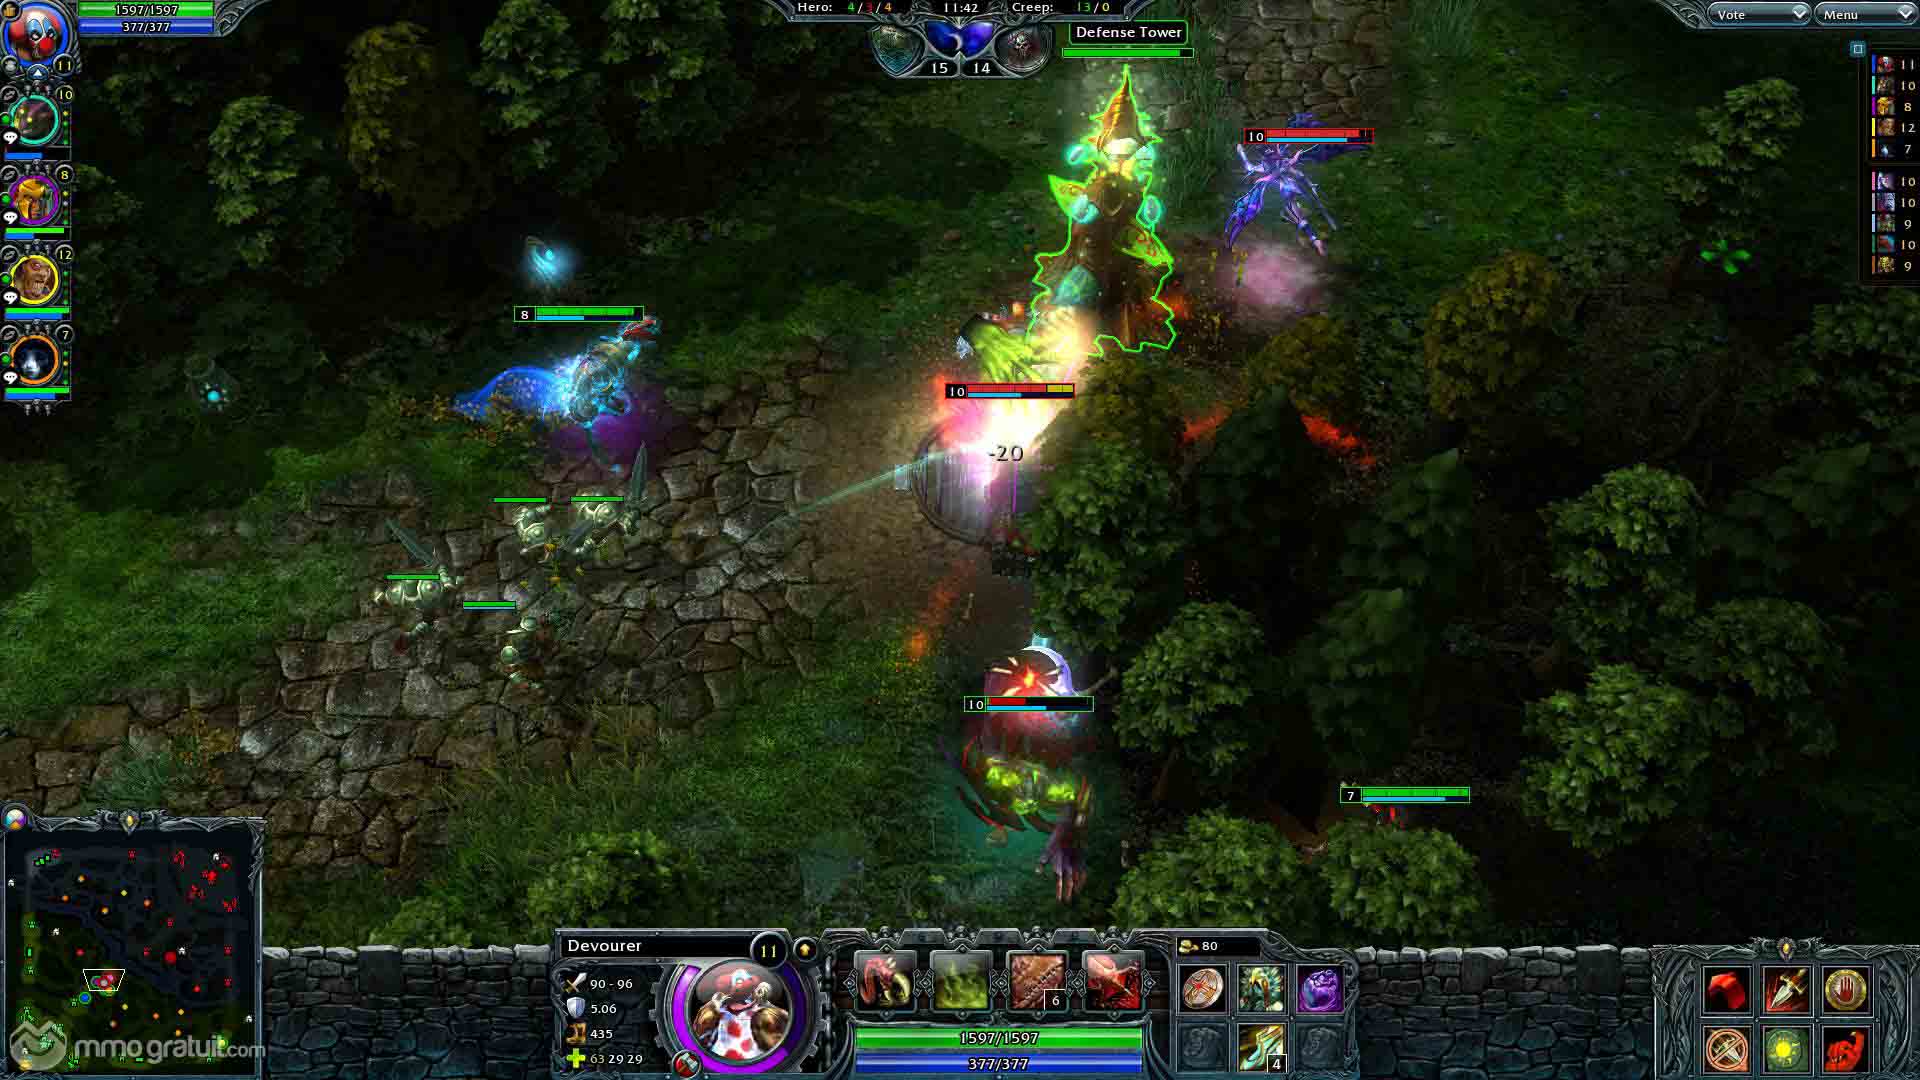 Heroes of Newerth - IGN